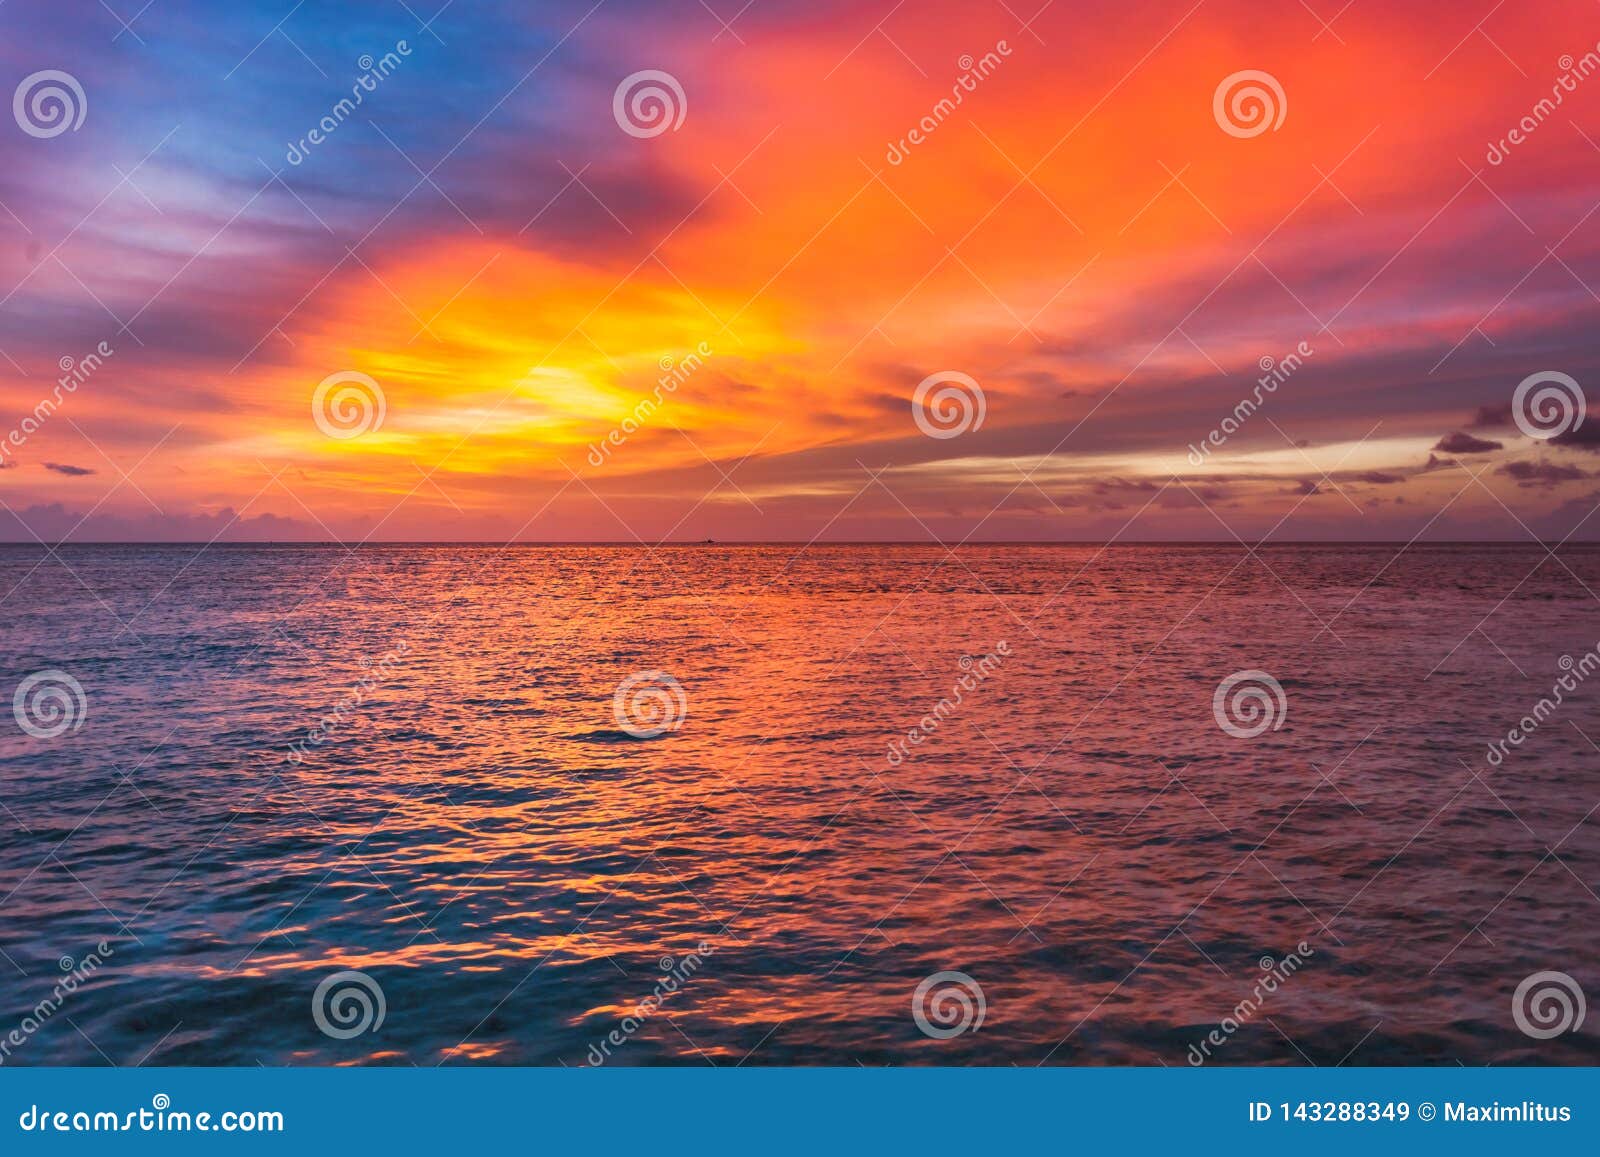 Amazing Sunset Over The Ocean Colorful Reflection In The Water Stock